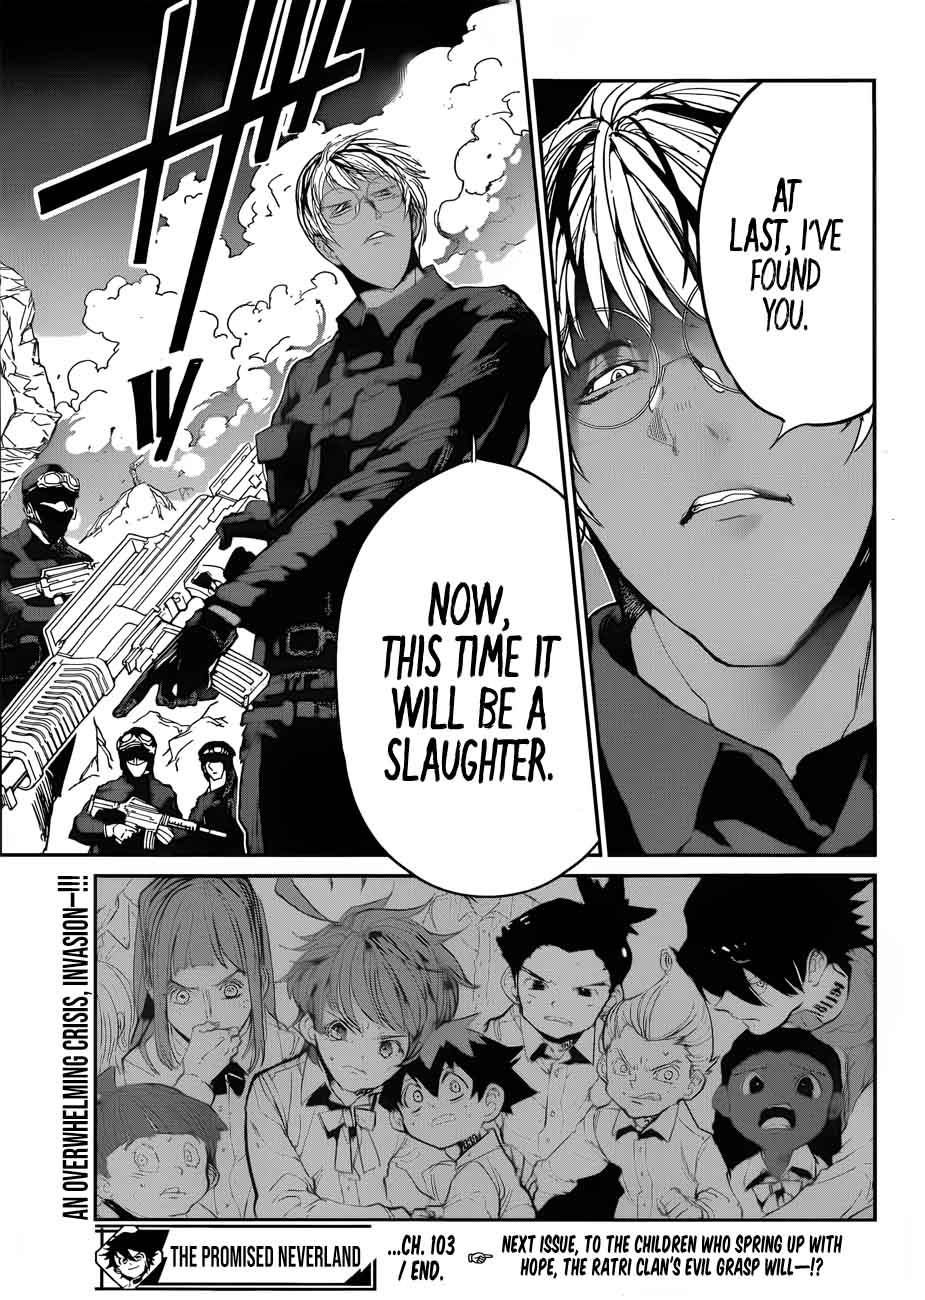 The Promised Neverland 103 19